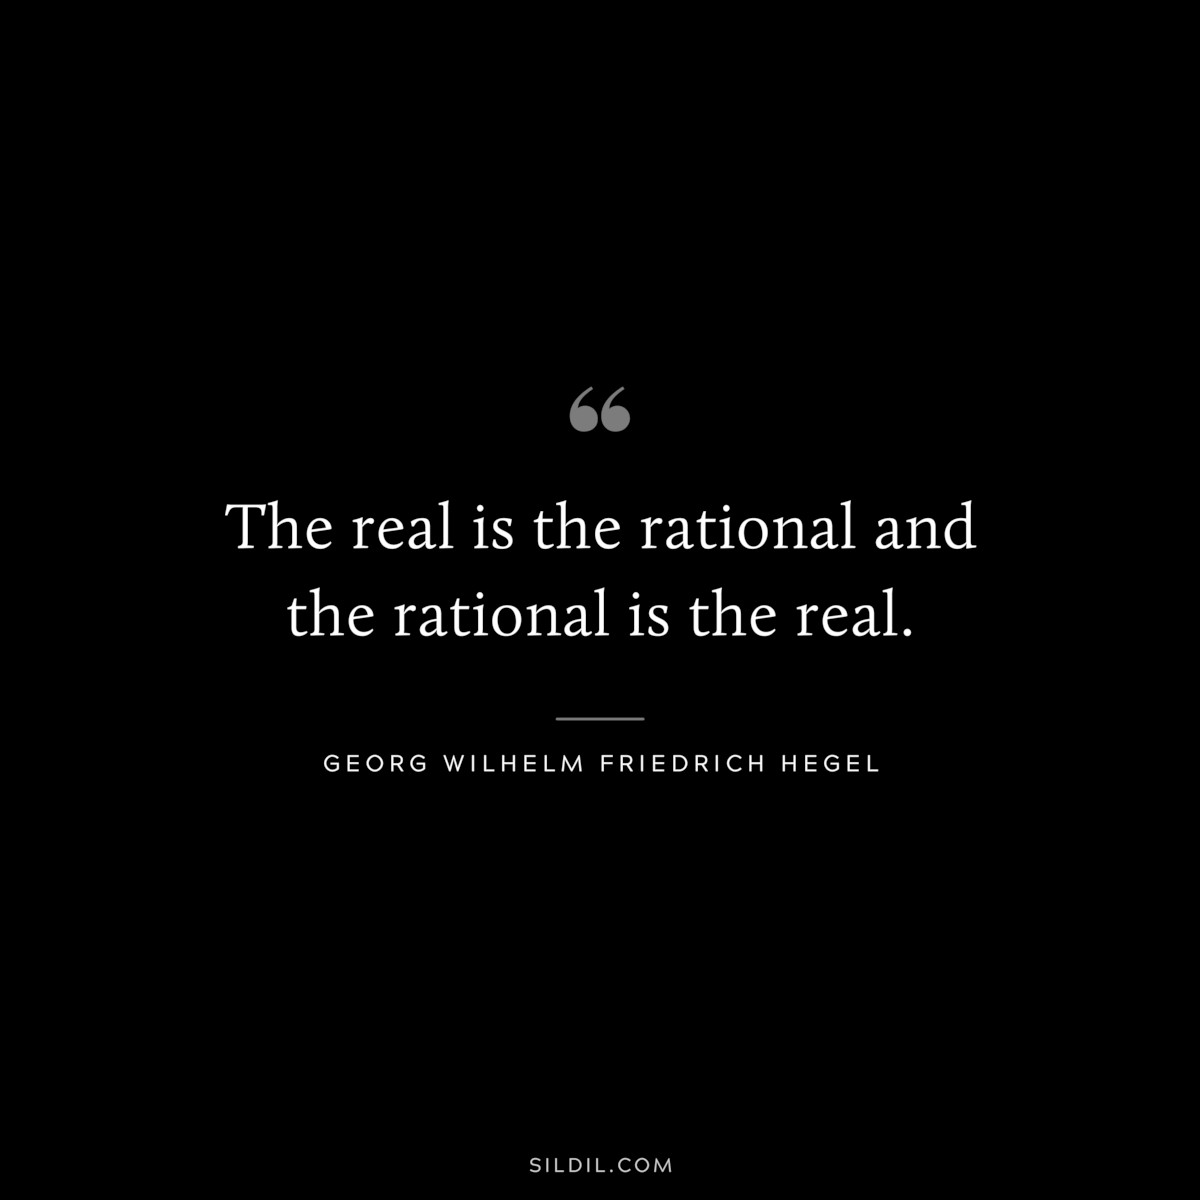 The real is the rational and the rational is the real. ― Georg Wilhelm Friedrich Hegel